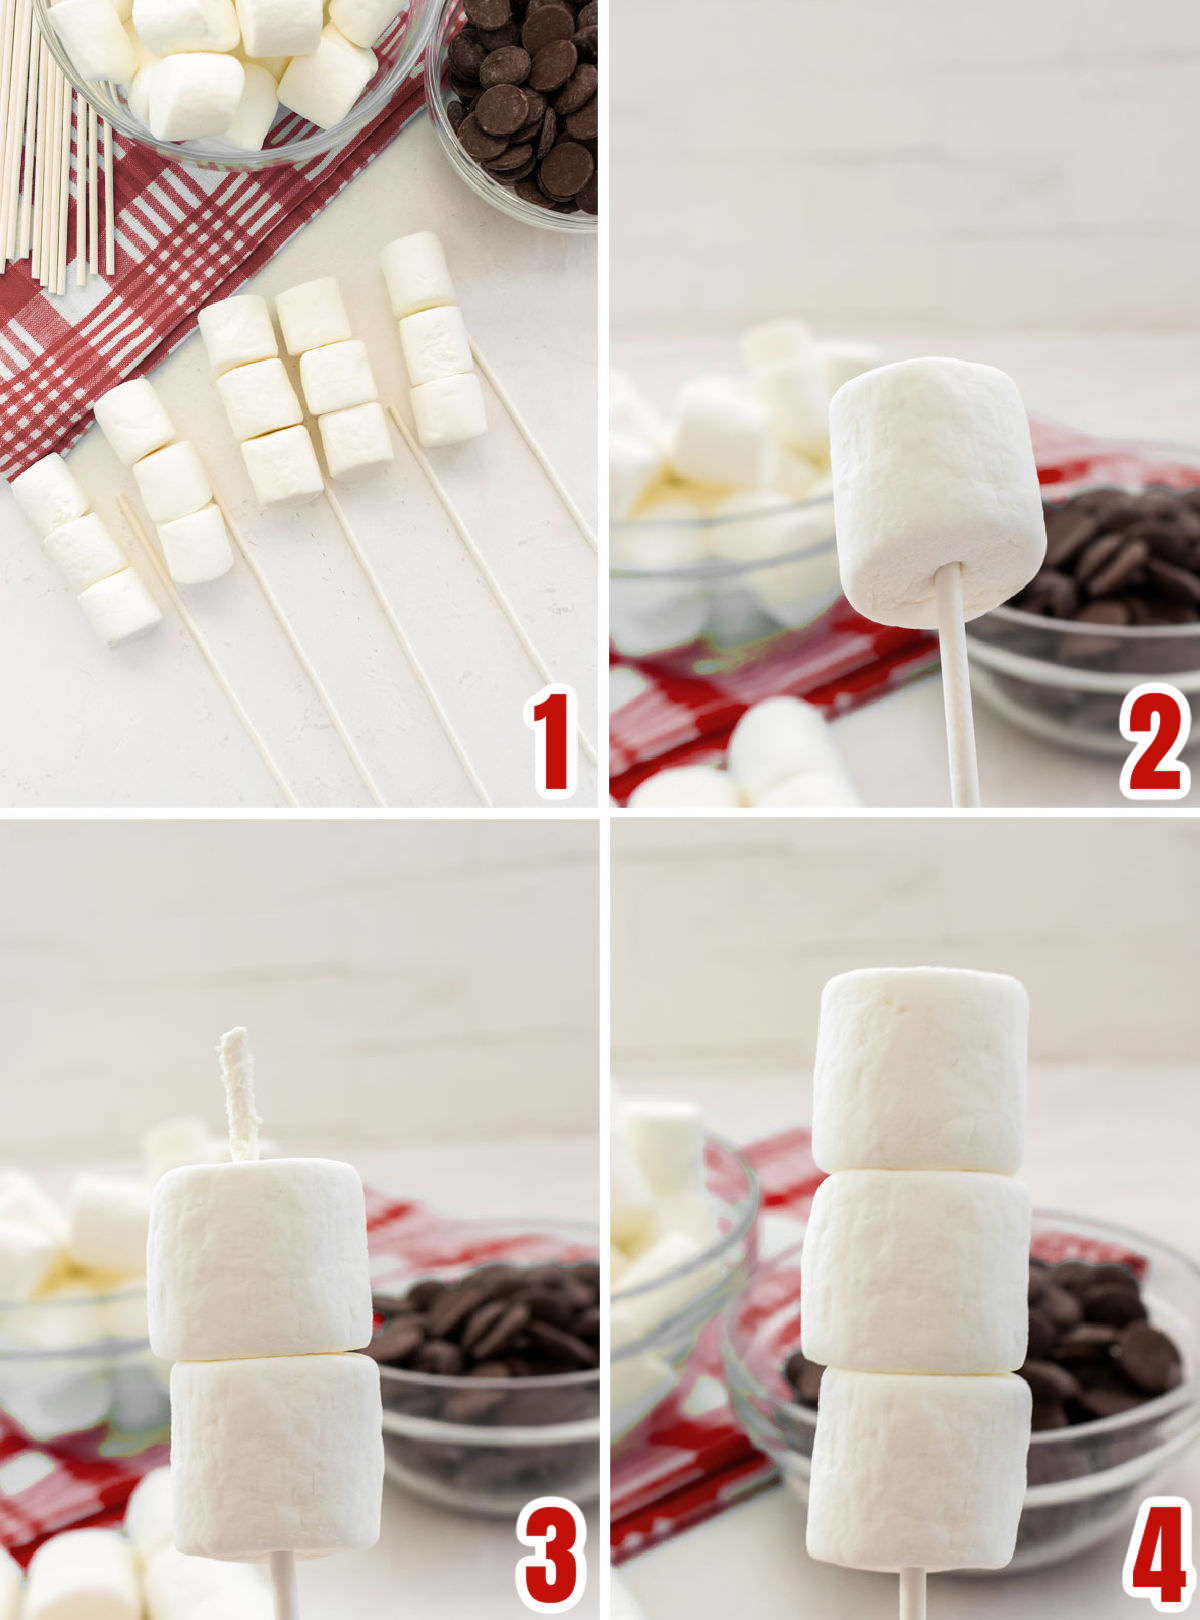 Collage image showing the steps for placing the marshmallows on the lollipop stick.